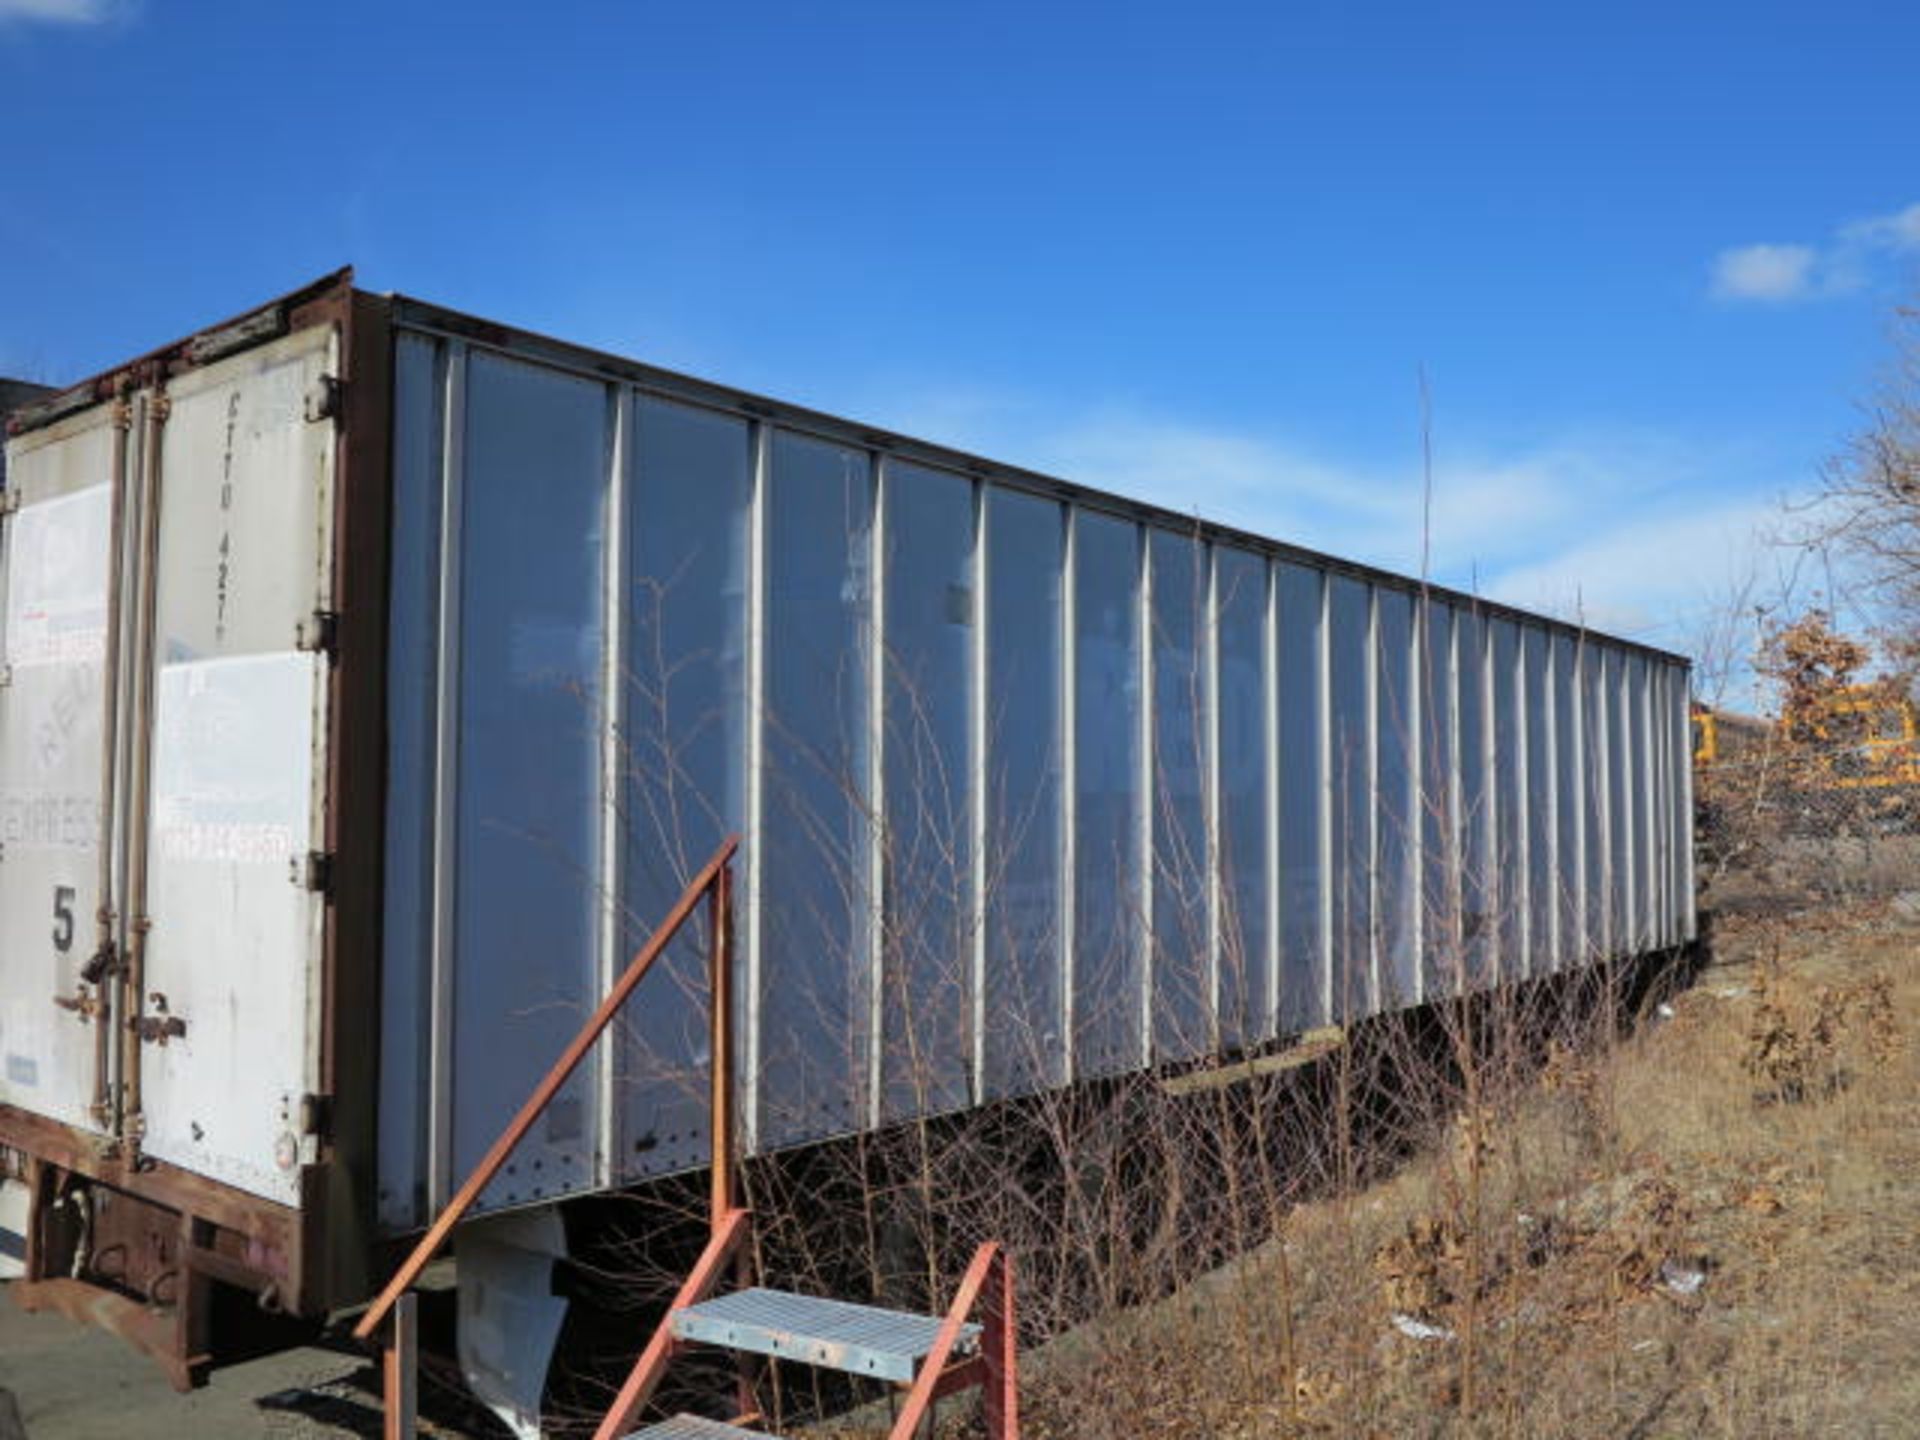 Strick 53' Dry Van Trailer Bill of Sale Only-trailer has been used for storage for the past decade